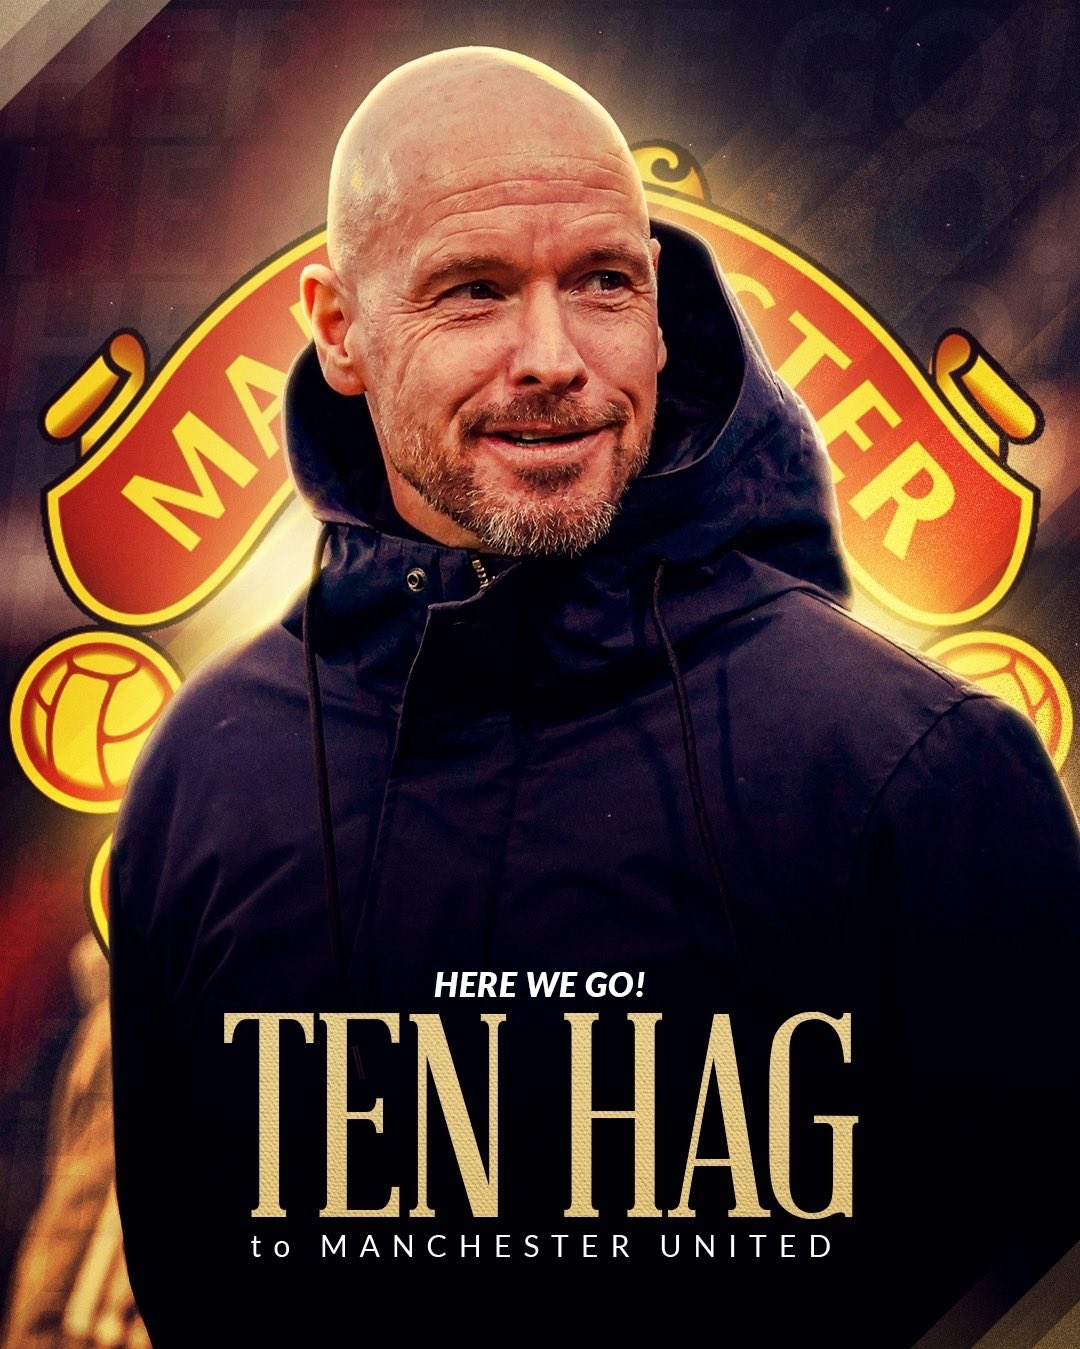 Fabrizio Romano on X: "Erik ten Hag to Manchester United, here we go! Agreement on contract now set to be completed. Mitchell van der Gaag, priority candidate for coaching staff. 🔴🤝 #MUFC